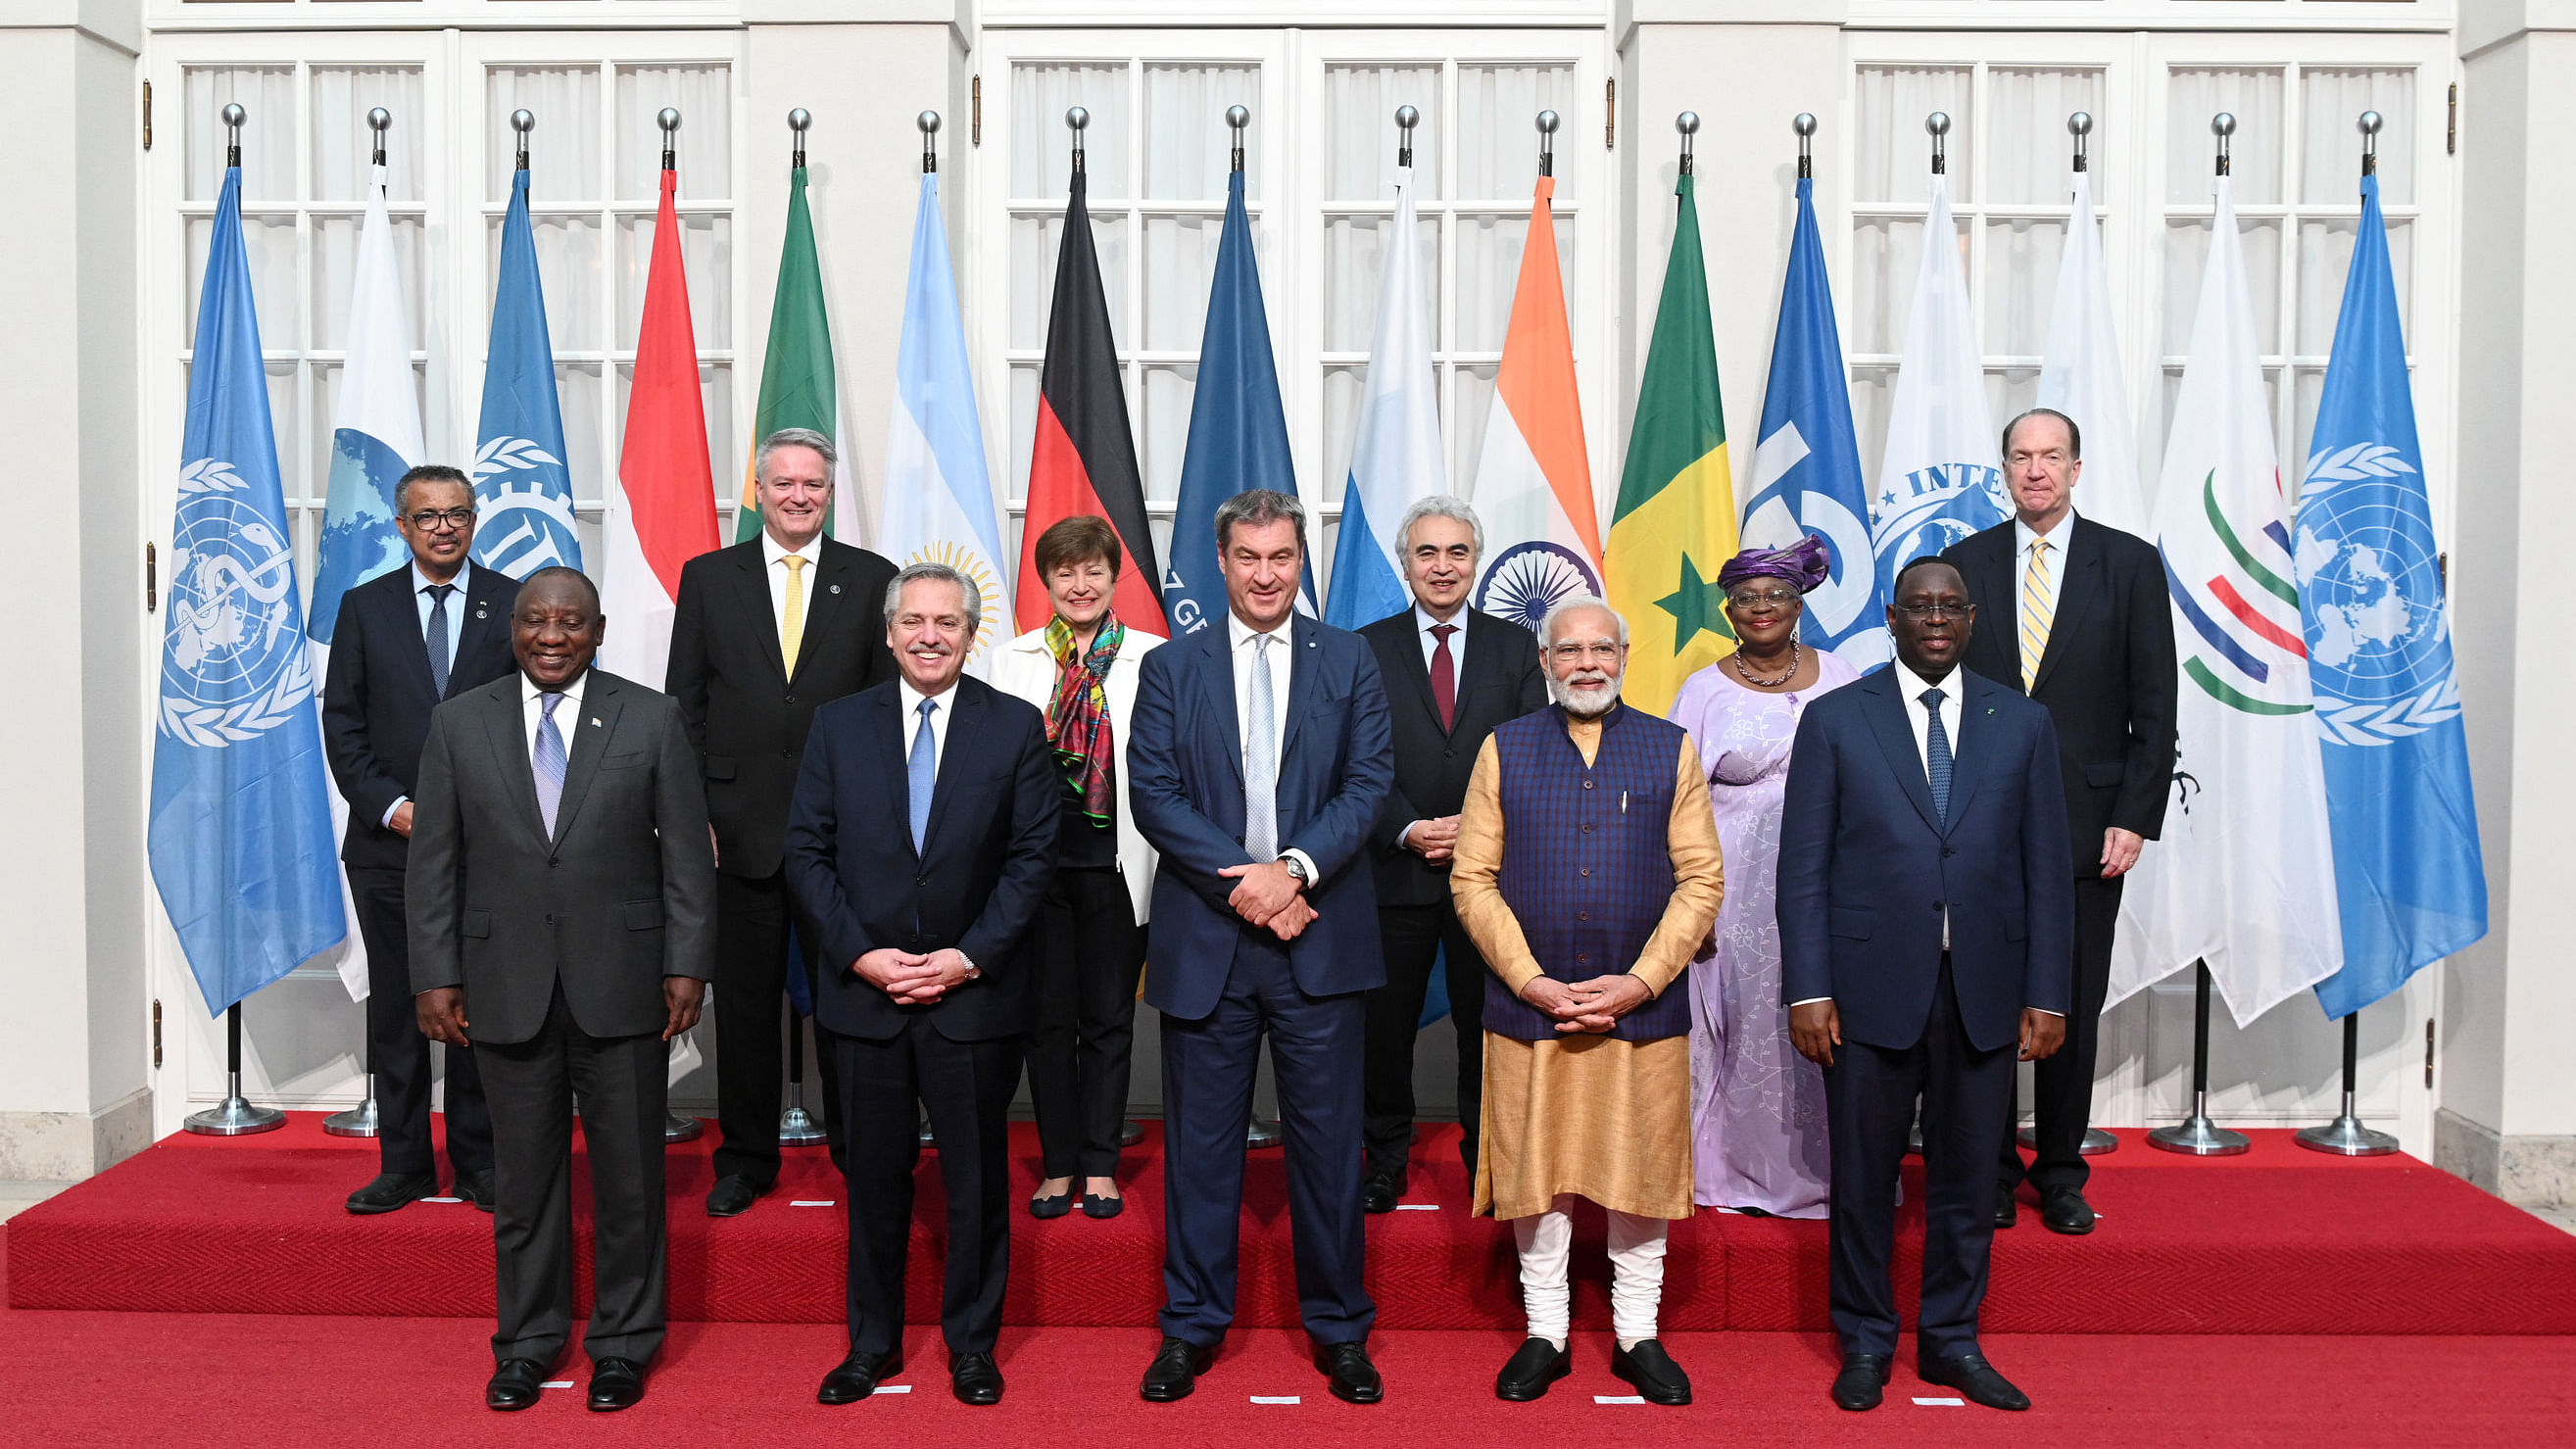 (Front Line - L-R) South African President Cyril Ramaphosa, Argentine President Alberto Angel Fernandez, Bavarian Minister-President Markus Soeder, Indian Prime Minister Narendra Modi and Senglese President Macky Sall, (Back - L-R) WHO Secretary-General Tedros Adhanom Ghebreyesus, OECD Secretary-General Mathias Cormann, IMF Director Kristalina Georgiewa, IEA Executive Director Fatih Birol, WTO Secretary General Ngozi Okonjo-Iweala and President of the World Bank David Malpass pose for a group photo at a reception in the Residence on the sidelines of the 48th G7 summit. Credit: PTI Photo